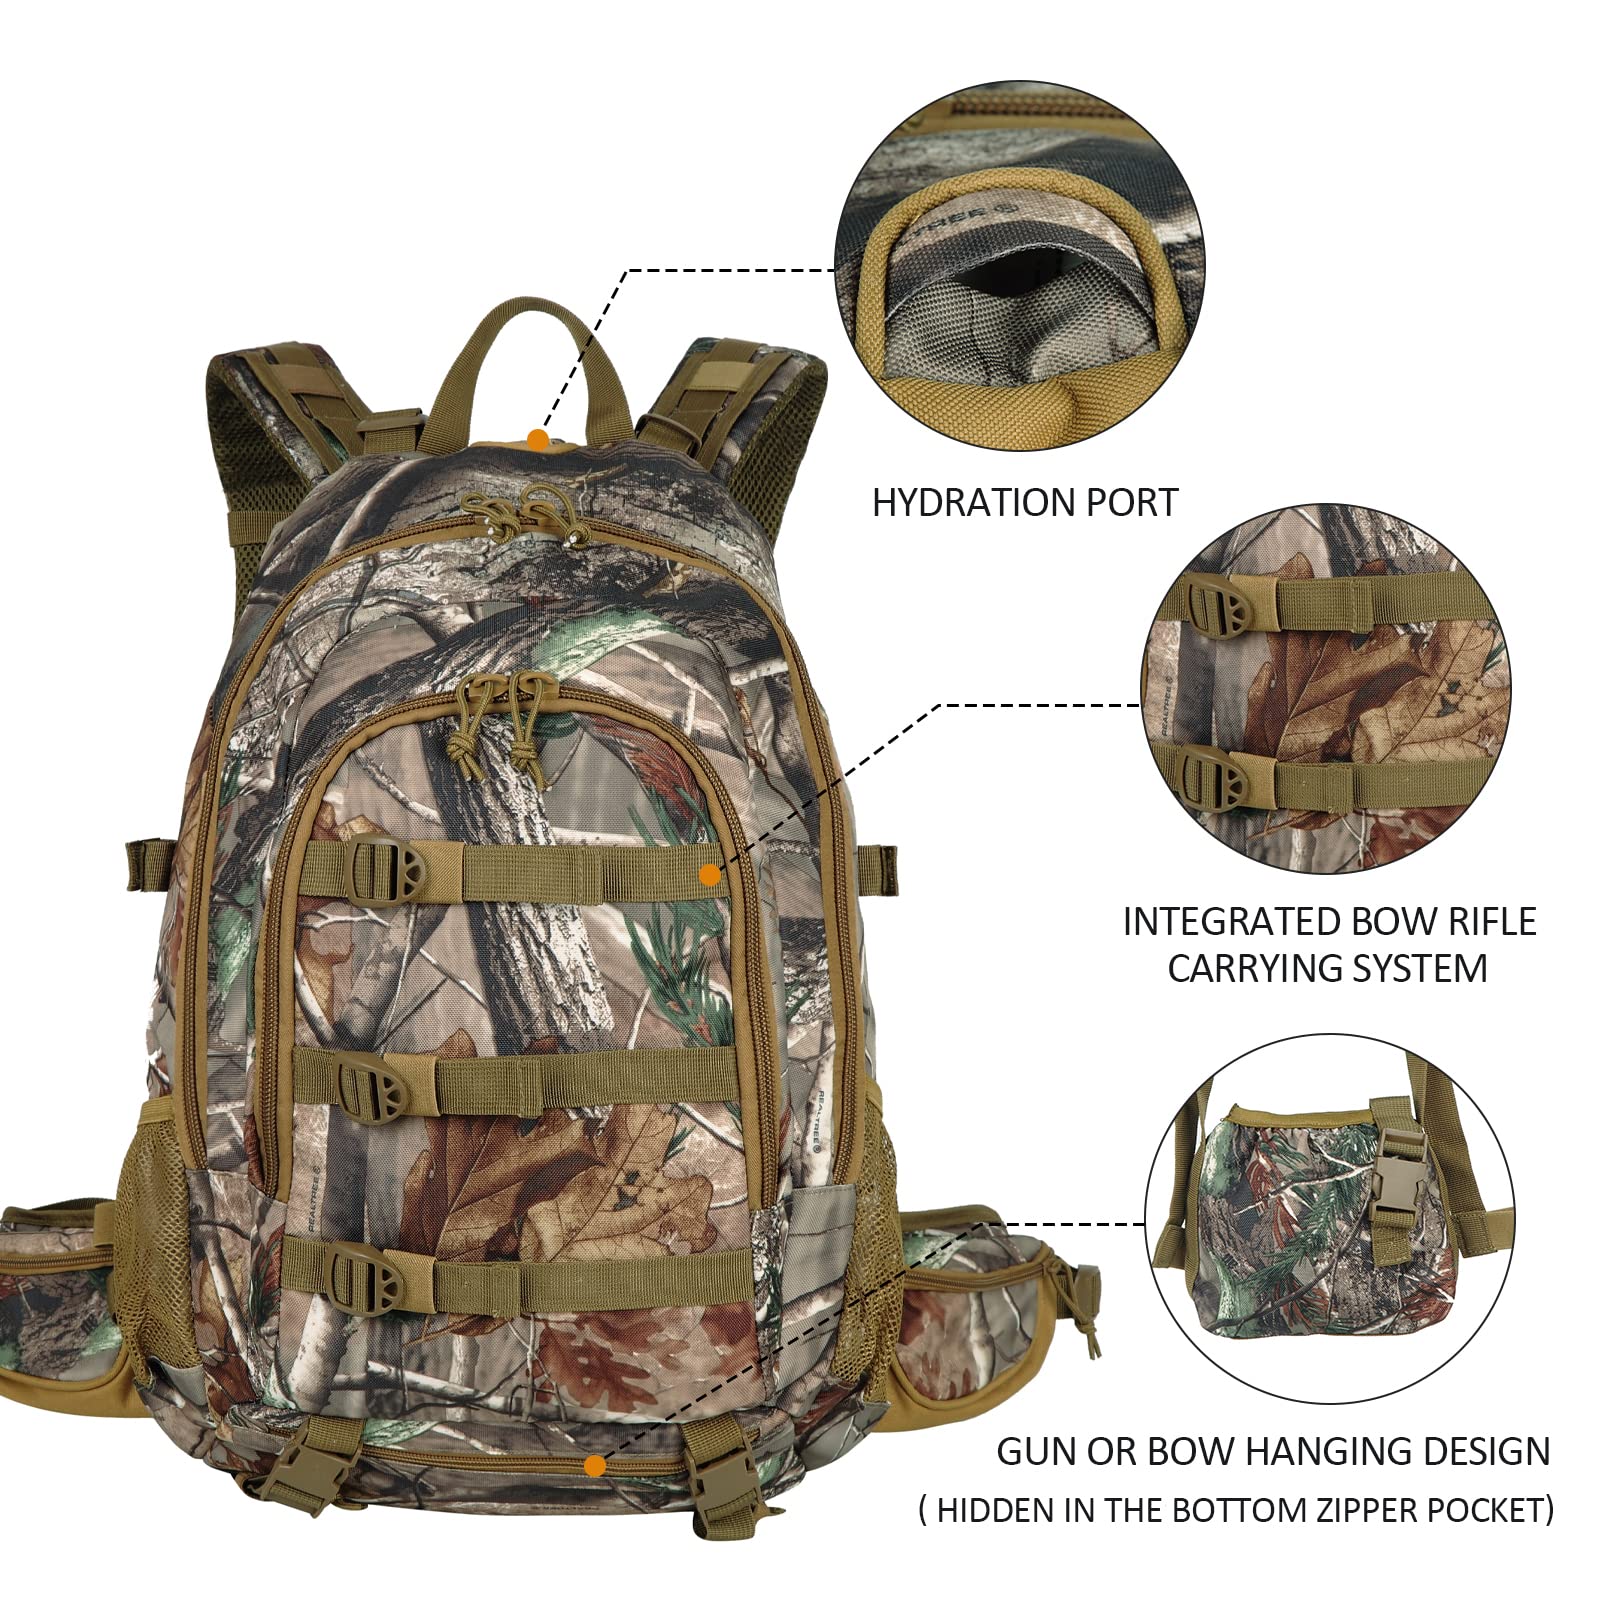 AUMTISC Camo Hunting Backpack with Rifle Holder and Waterproof Rain Cover, Outdoor Day pack Hiking Bag for Rifle Gun Bow, Travel Packs for Camping Climbing,Camouflage